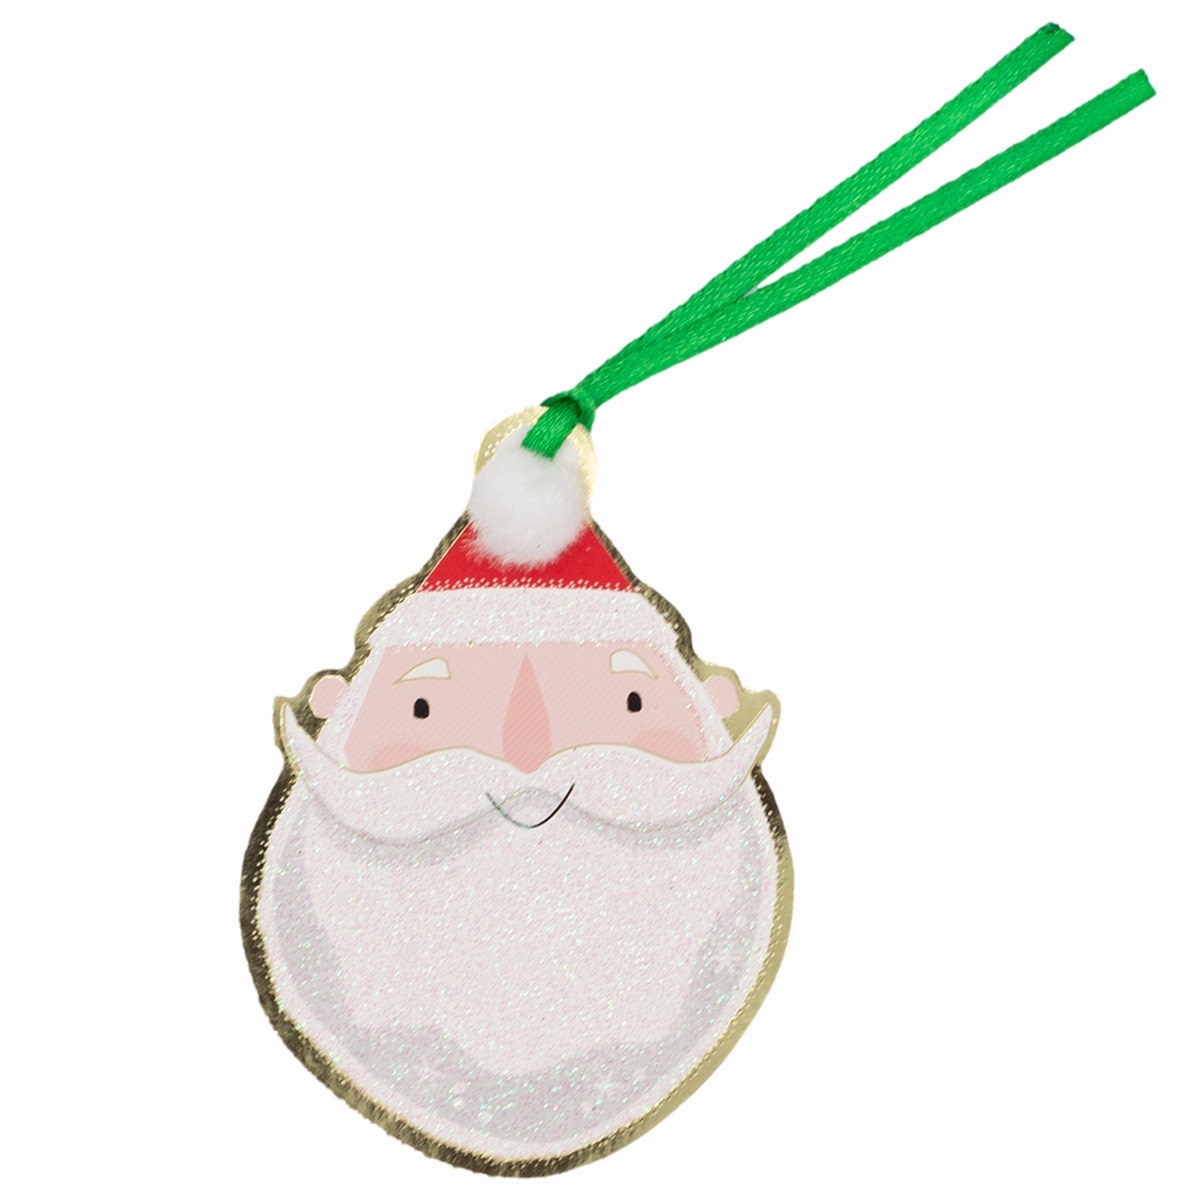 12ct Deluxe 3D Christmas To-From Gift Tags with Foil & Glitter